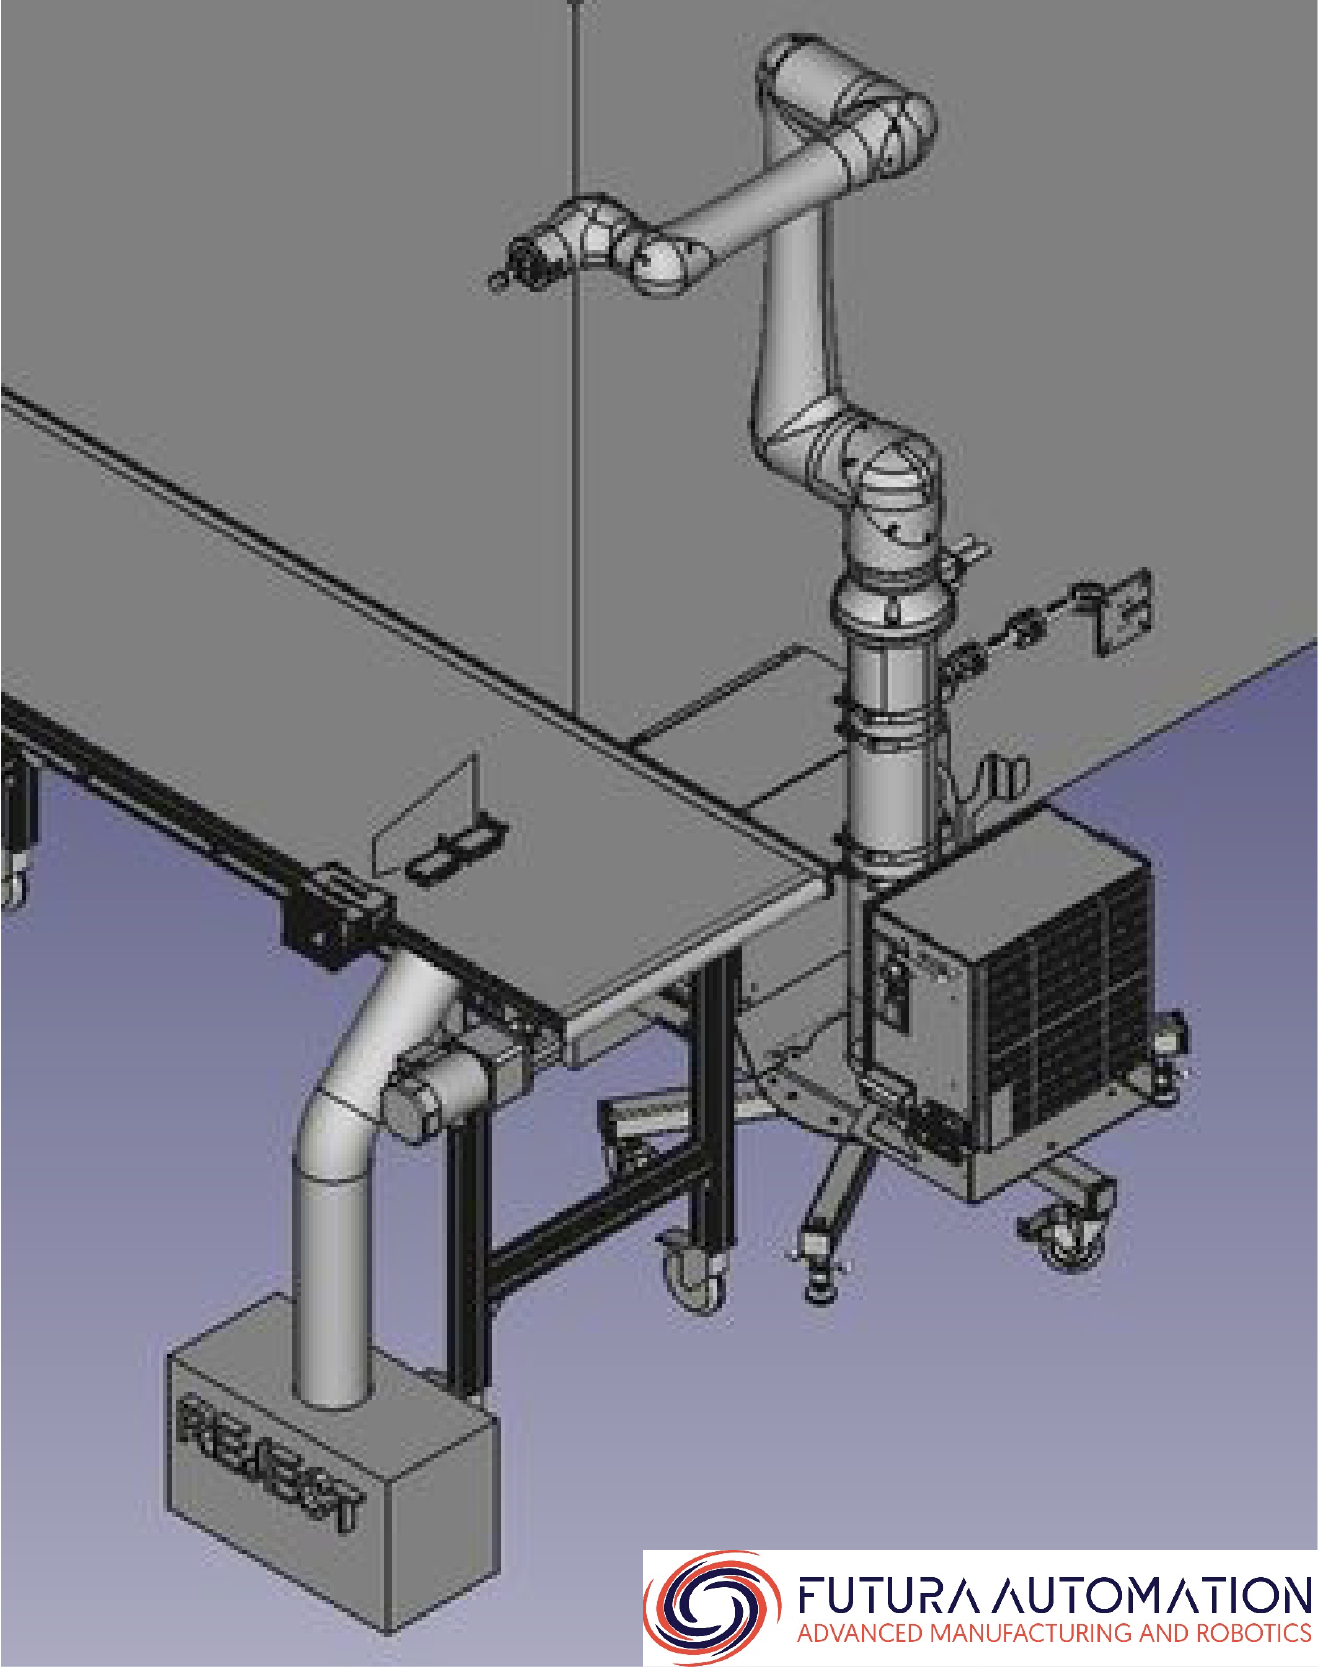 Futura Automation features 3D Inline Inspection Systems